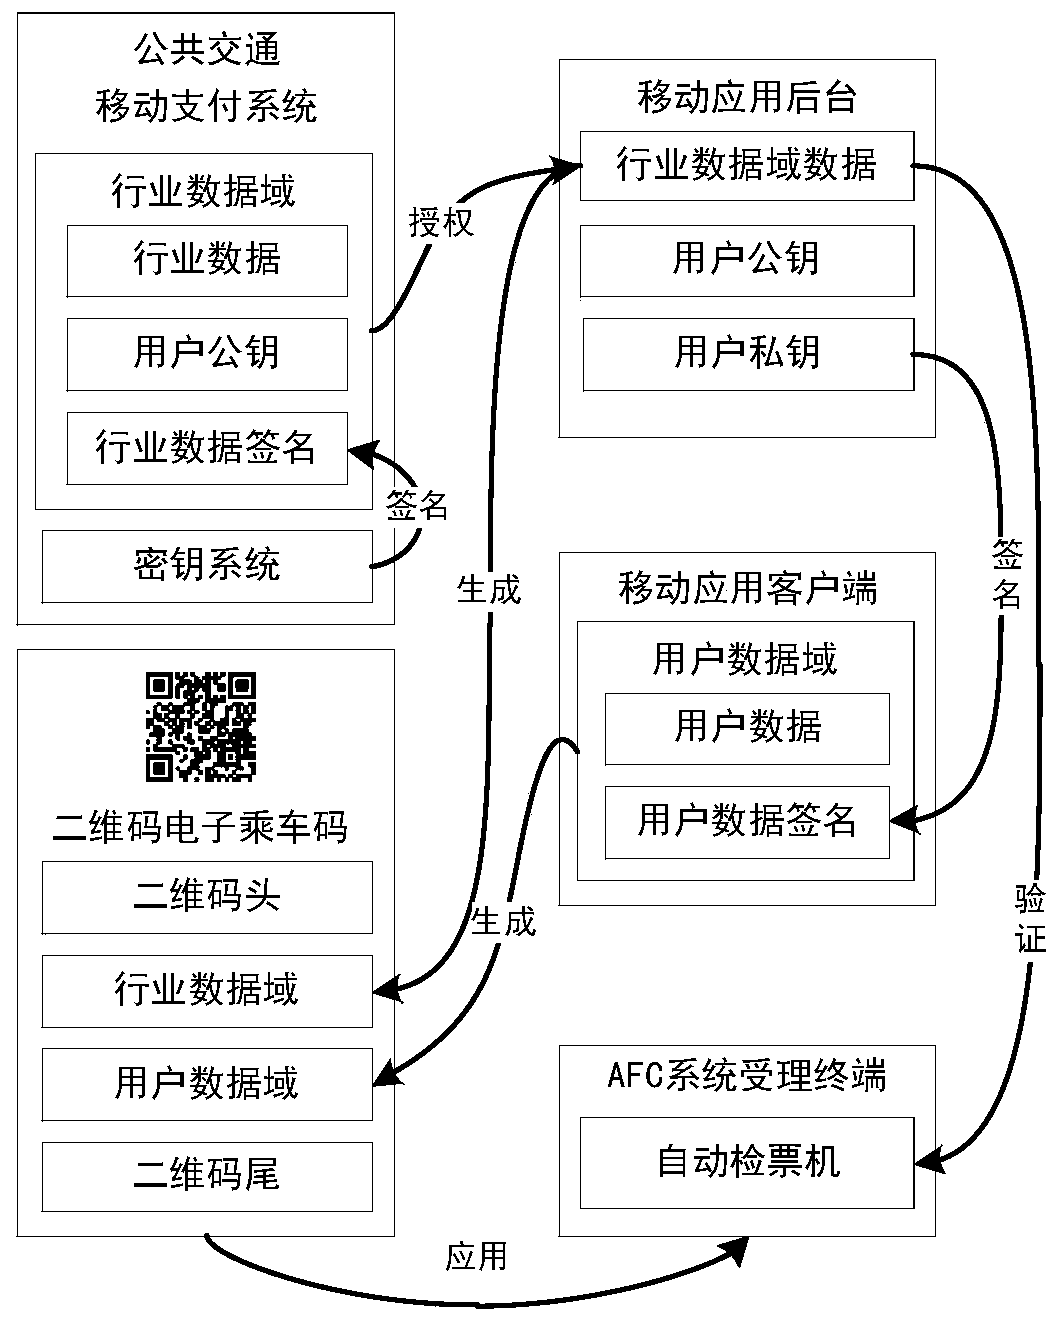 A two-dimensional code for mobile payment of a public transport automatic fare collection system